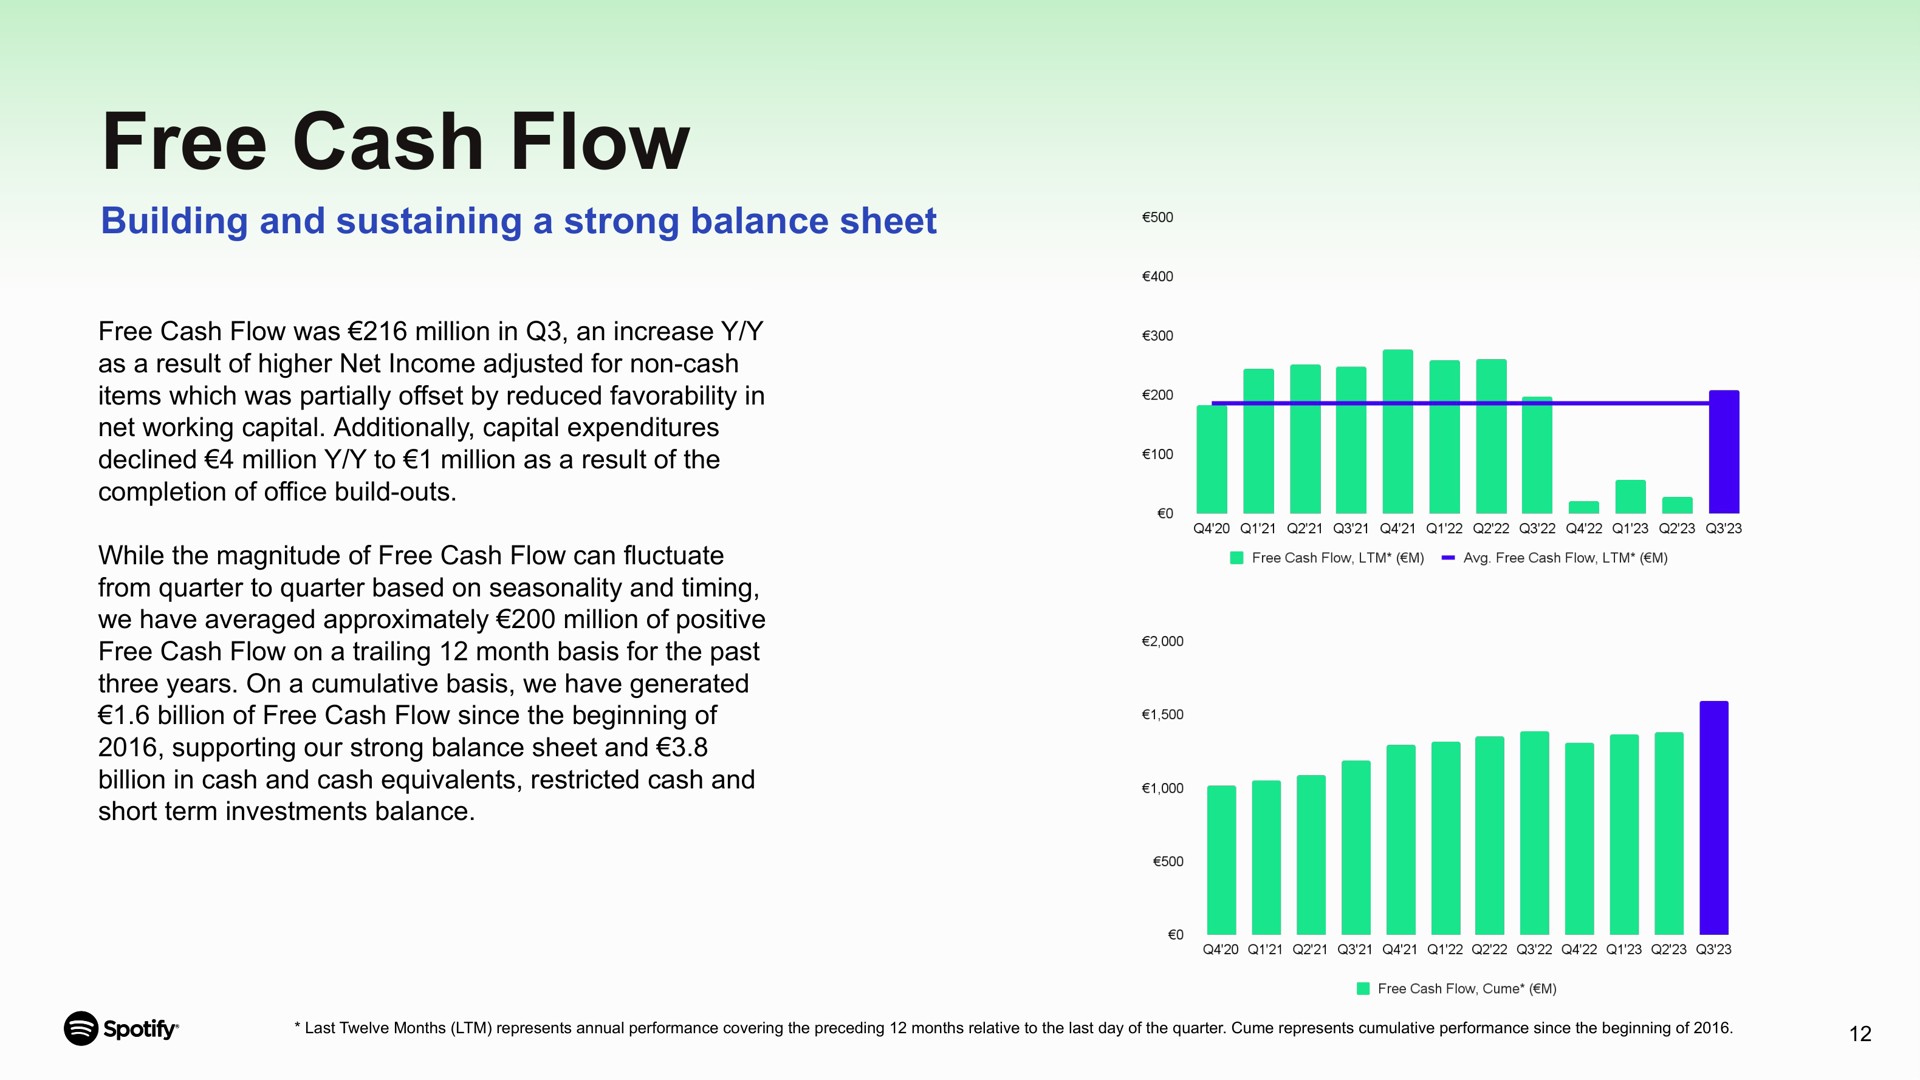 free cash flow building and sustaining a strong balance sheet | Spotify